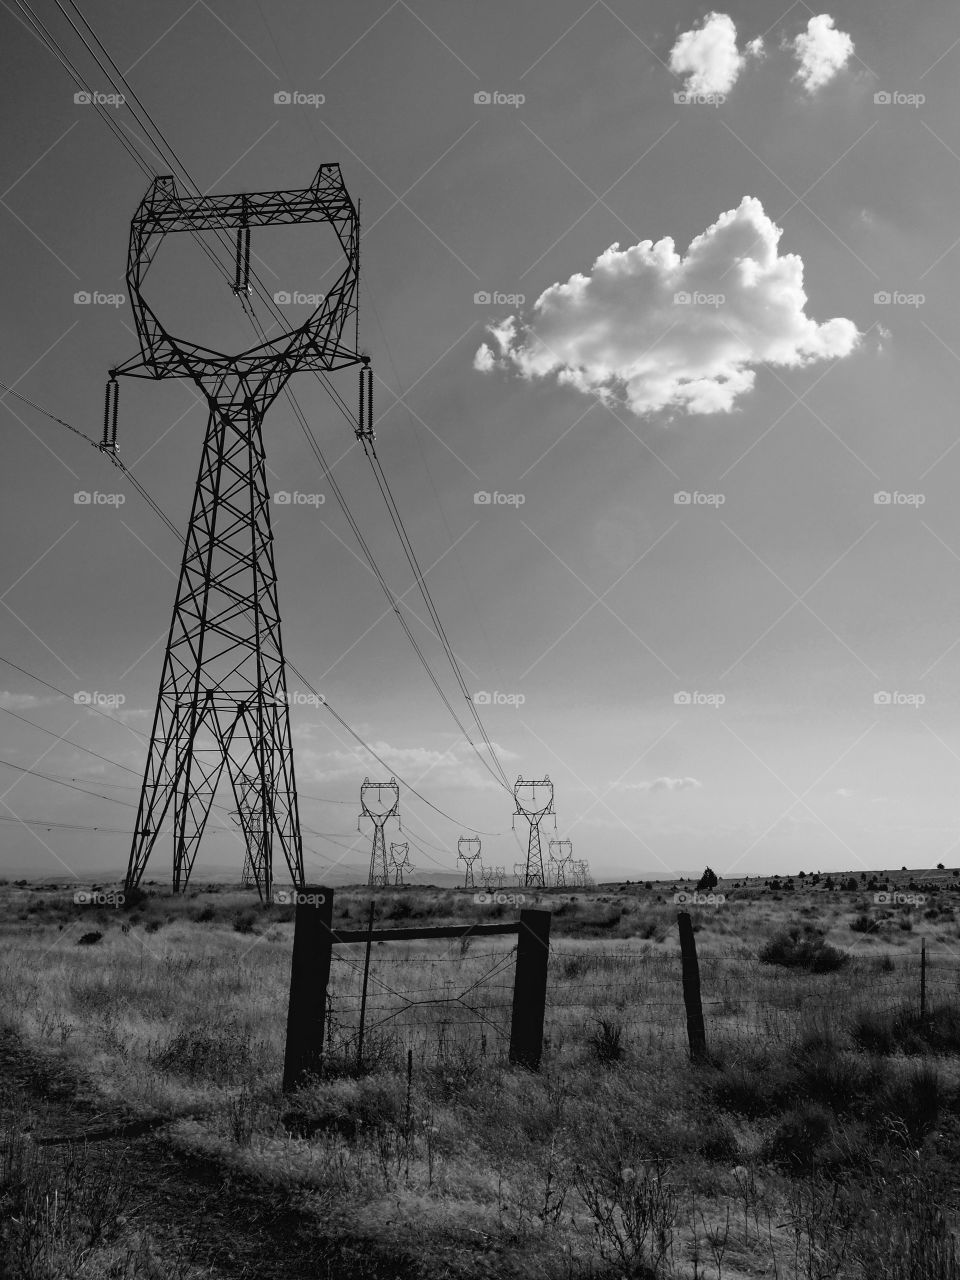 A line of towers carrying electricity to rural Oregon near Shaniko on a fall day.